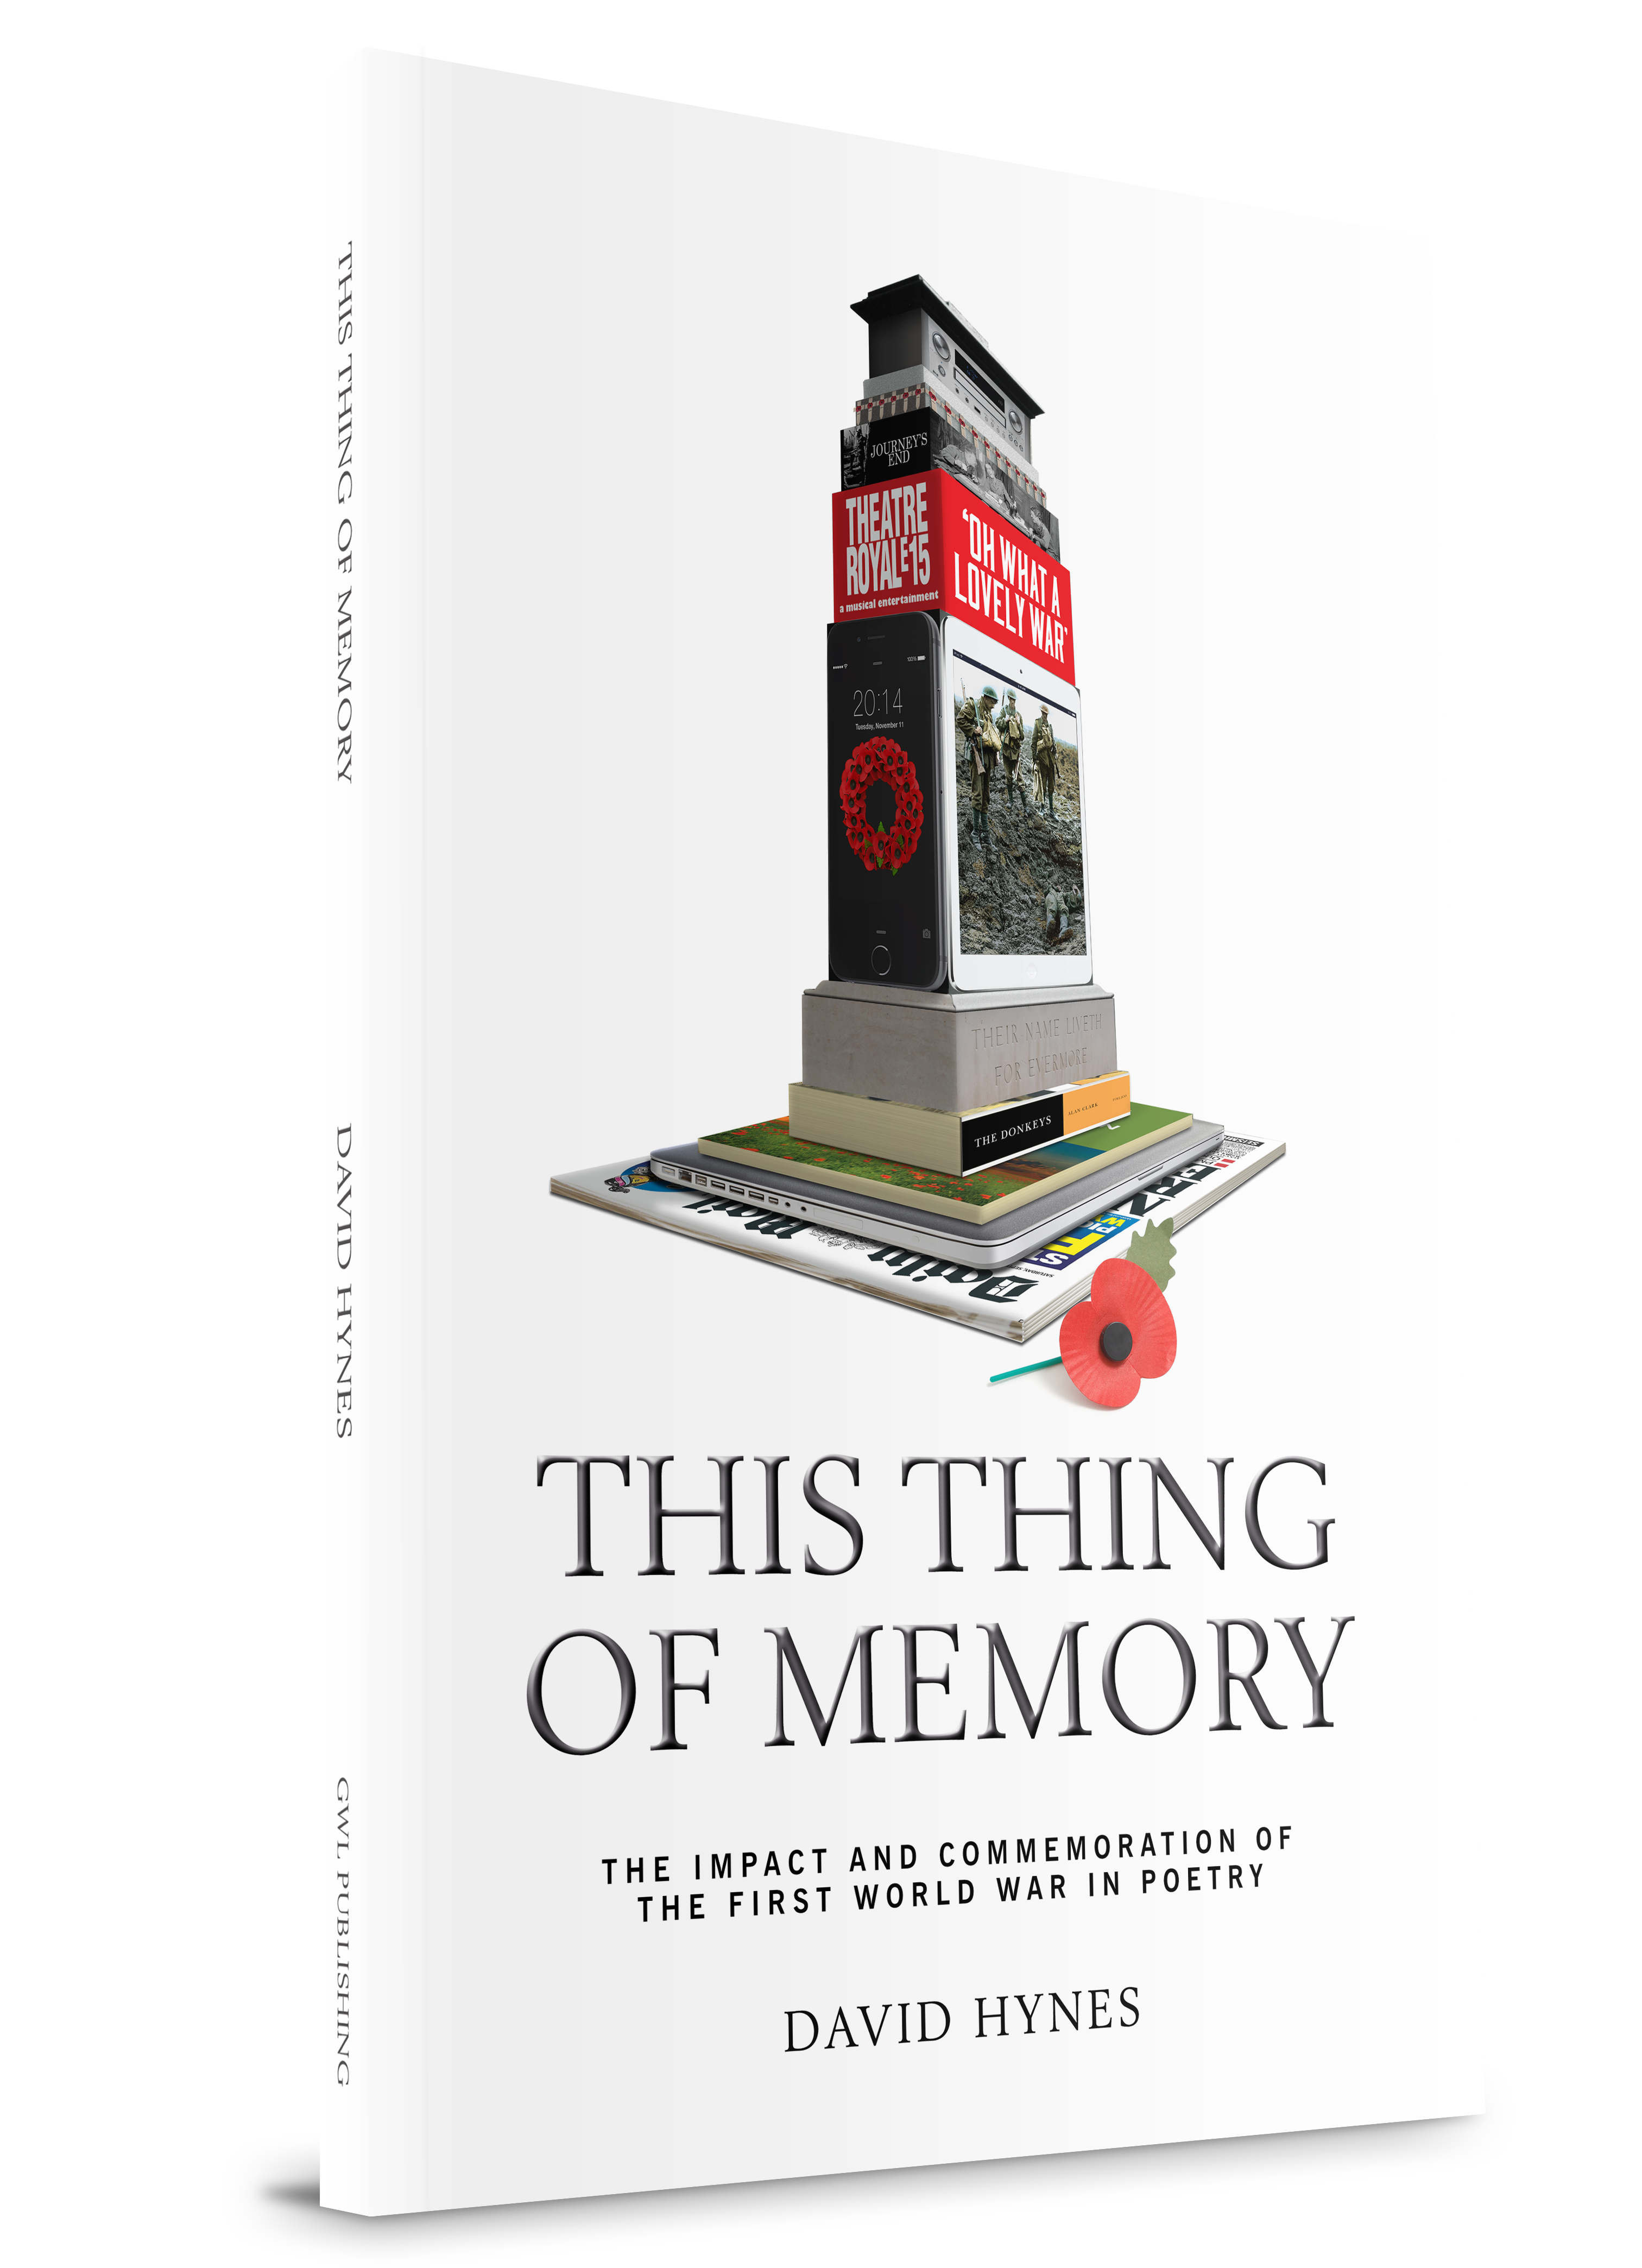 Front cover image of This Thing of Memory by David Hynes.